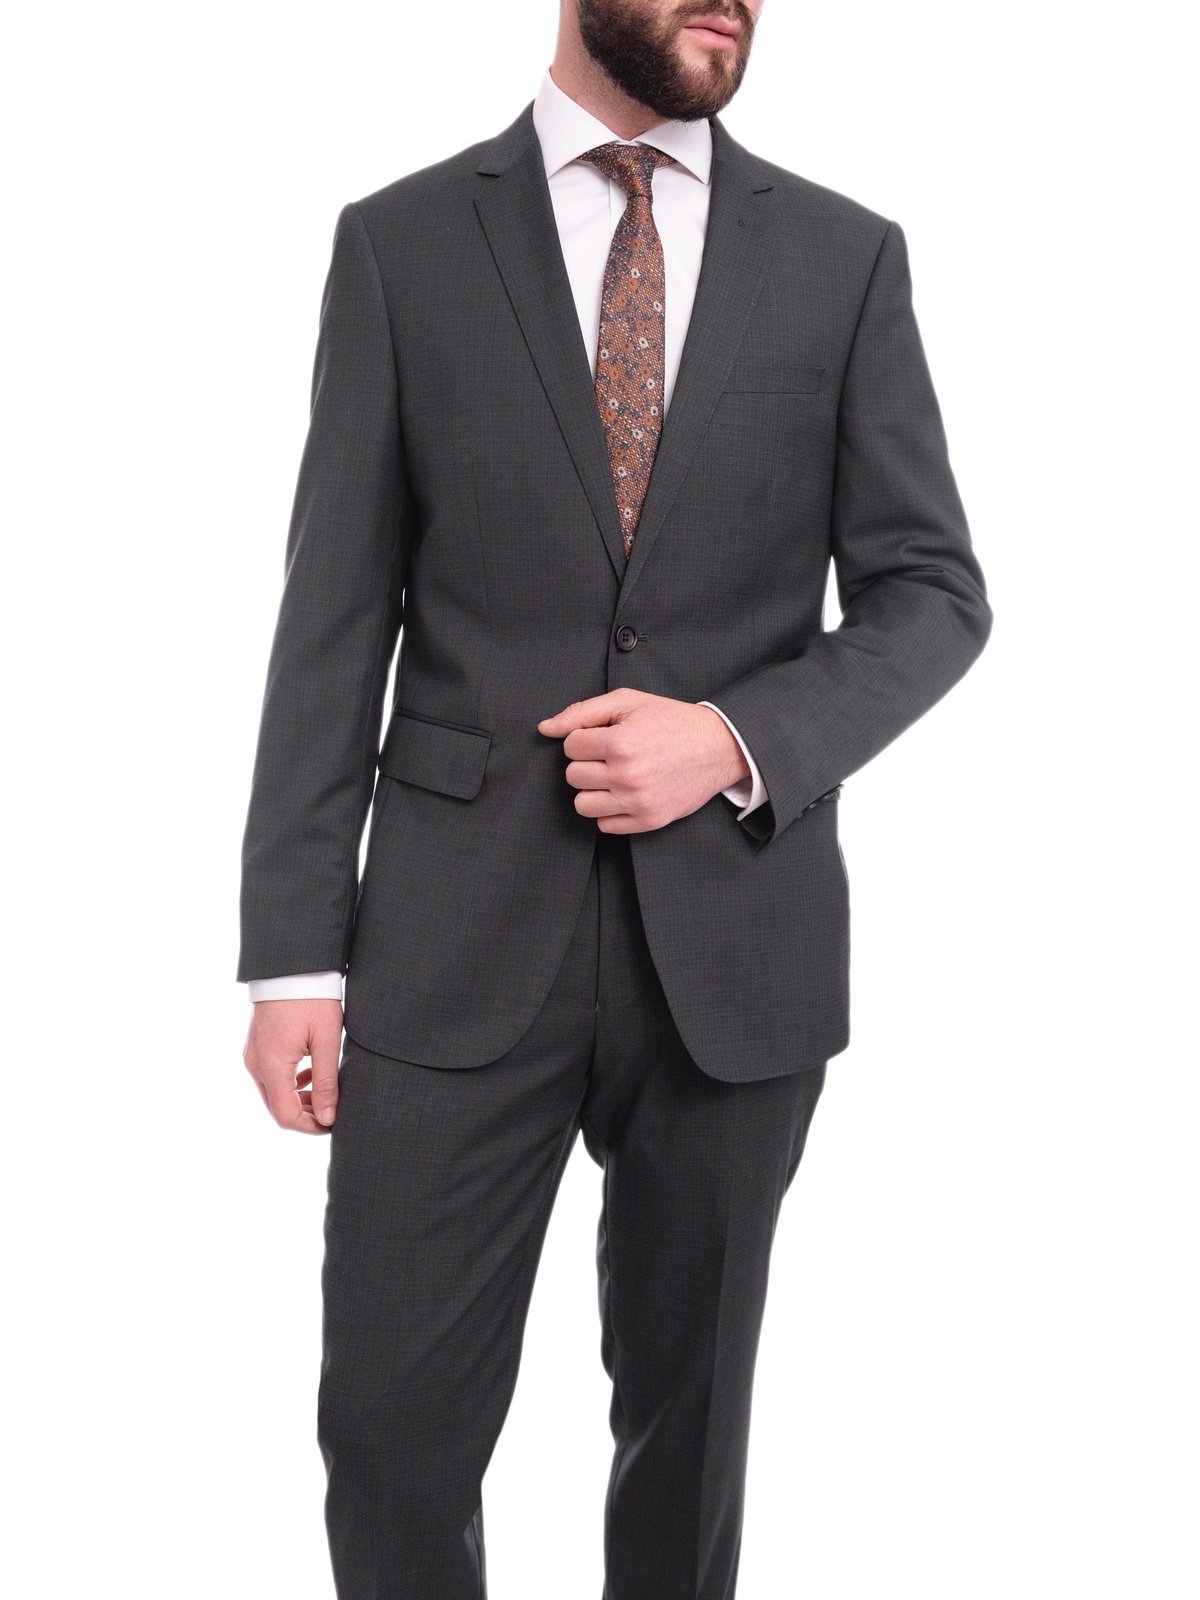 Label M SUITS Mens Extra Slim Fit Gray Texured Two Button Wool Suit